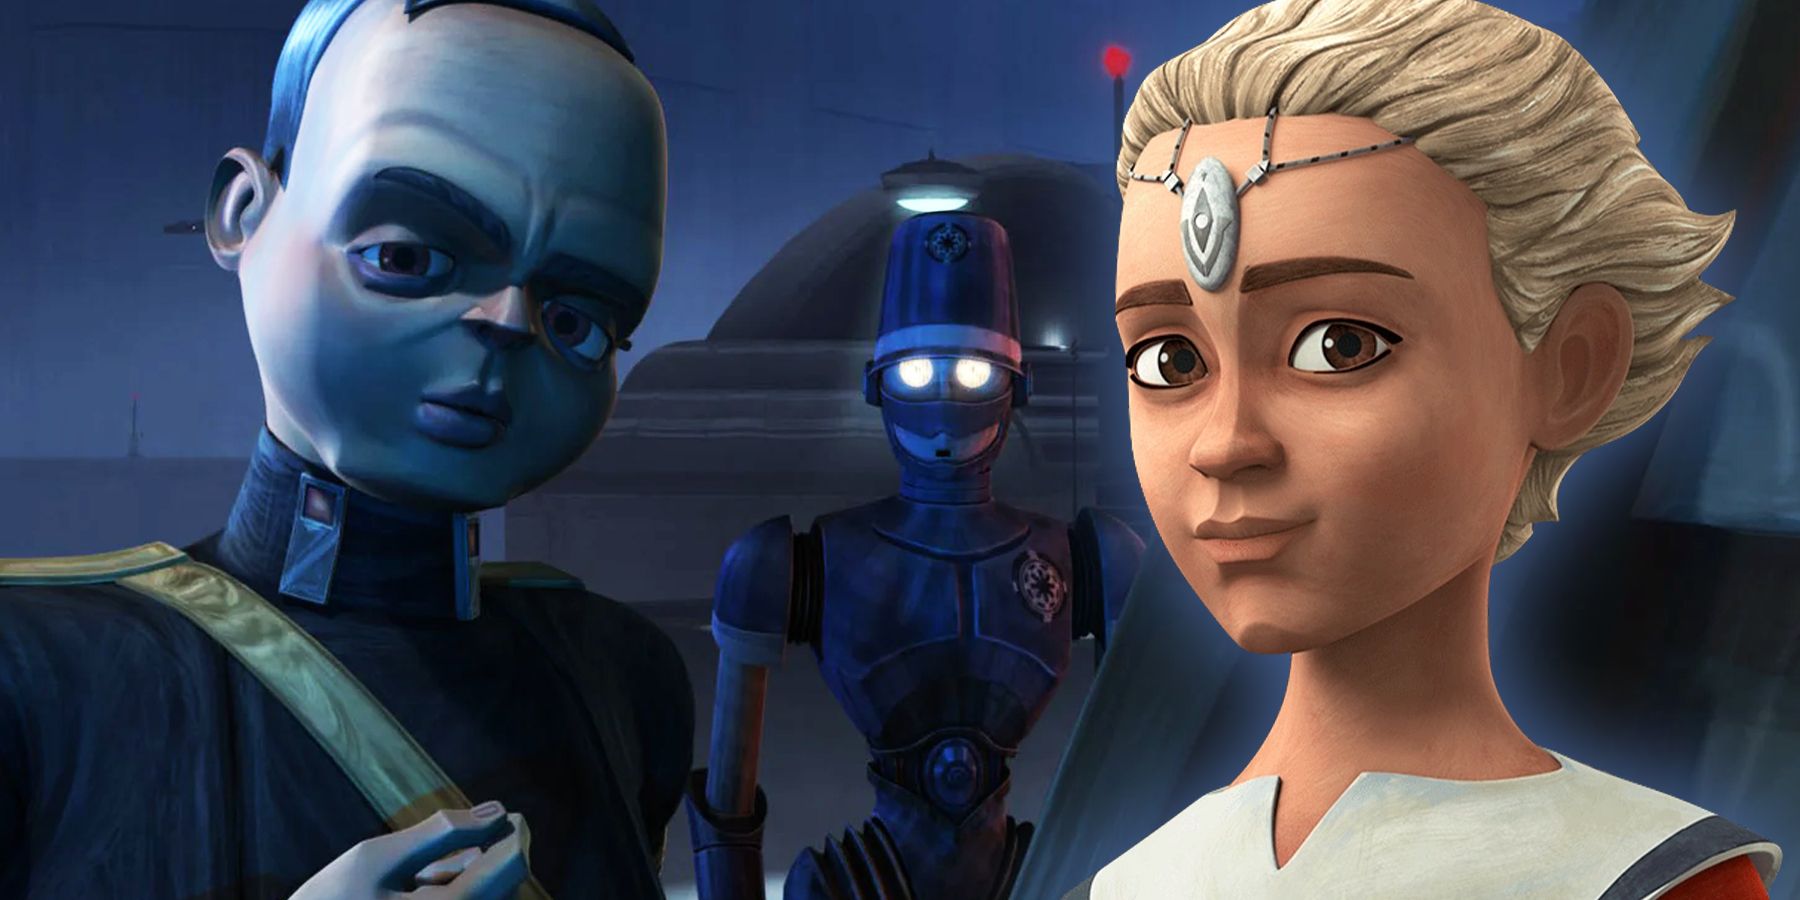 On the left, Tan Divo of Clone Wars looks on with skepticism. On the right, Omega of Bad Batch smiles. 